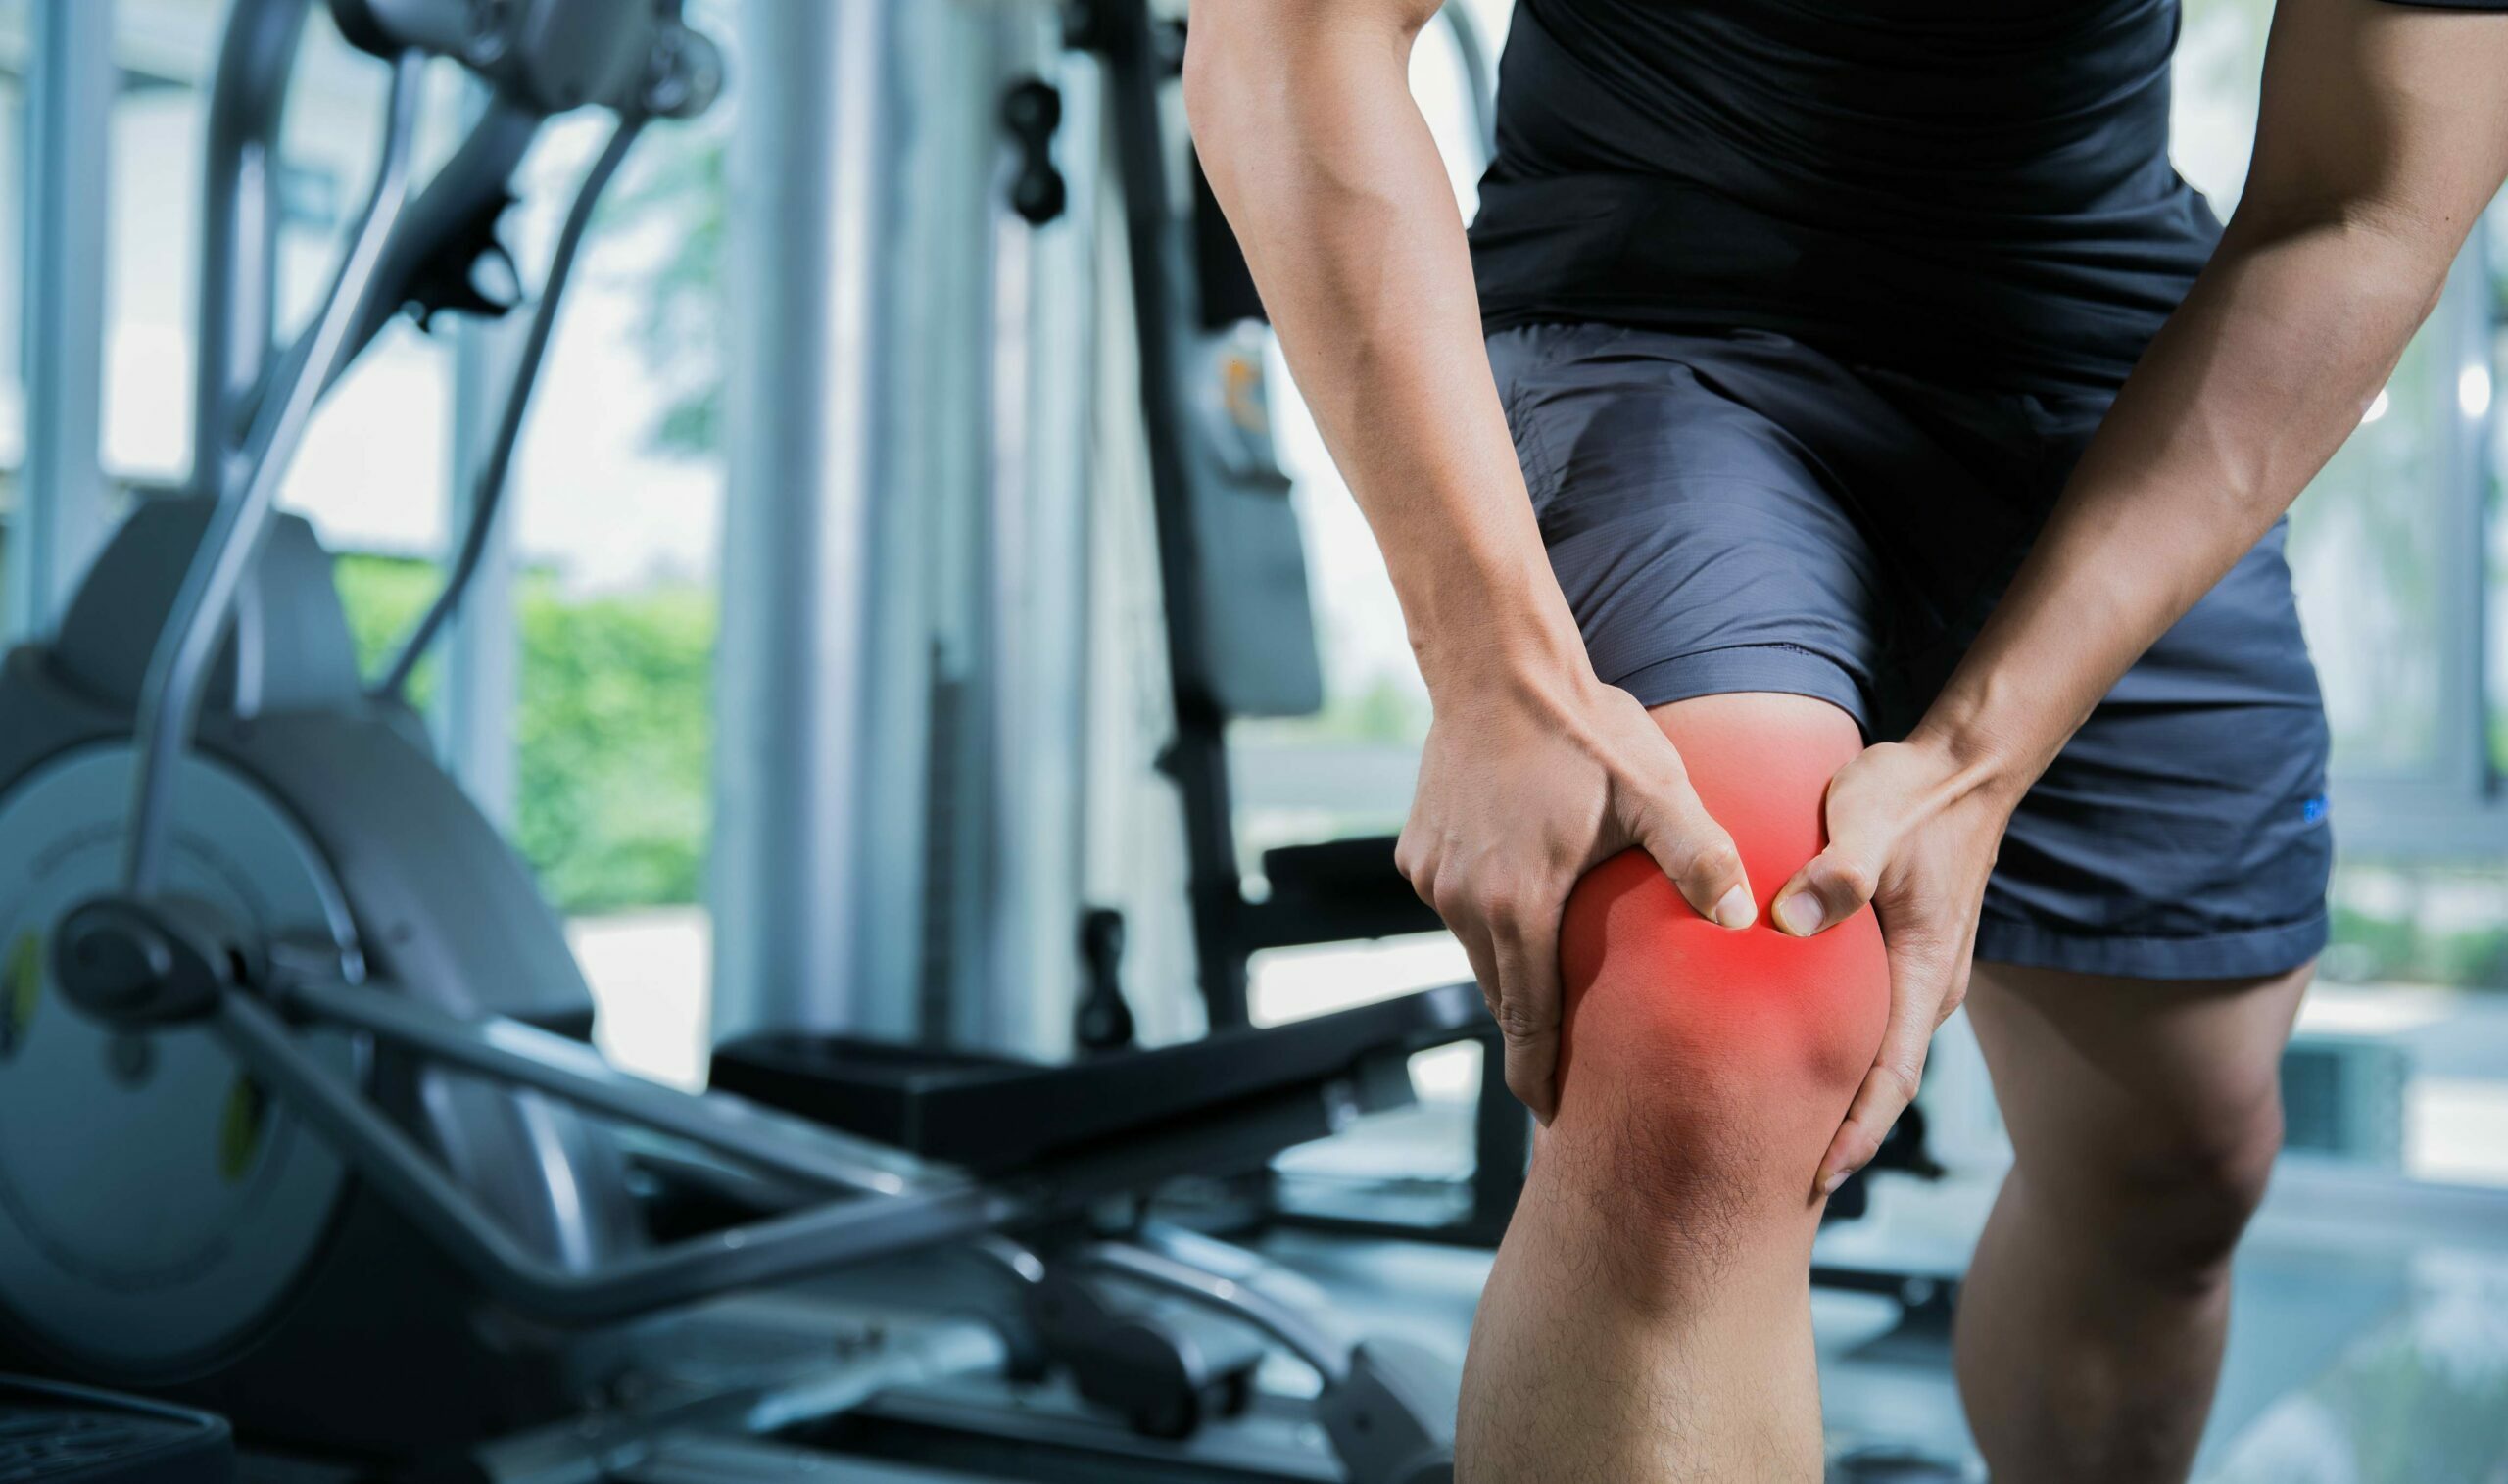 MUSCLE SORENESS v. JOINT PAIN — Champion Performance & Physical Therapy